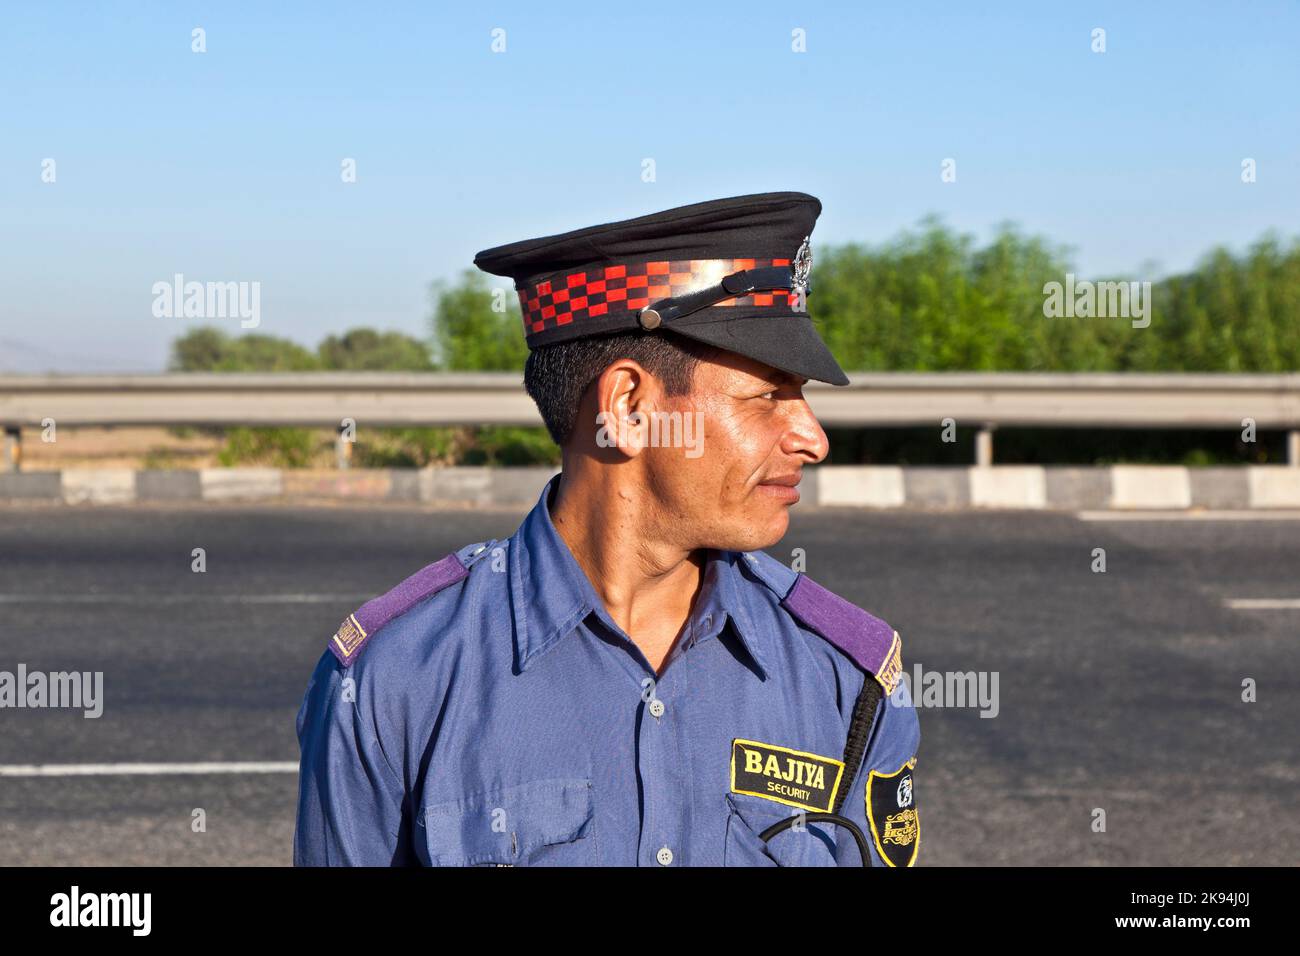 JAIPUR, INDIA - NOV 12: A private guardin uniform protects the parking place and the restaurant at the highway Delhi - JAIPUT on November 11,2011 in D Stock Photo